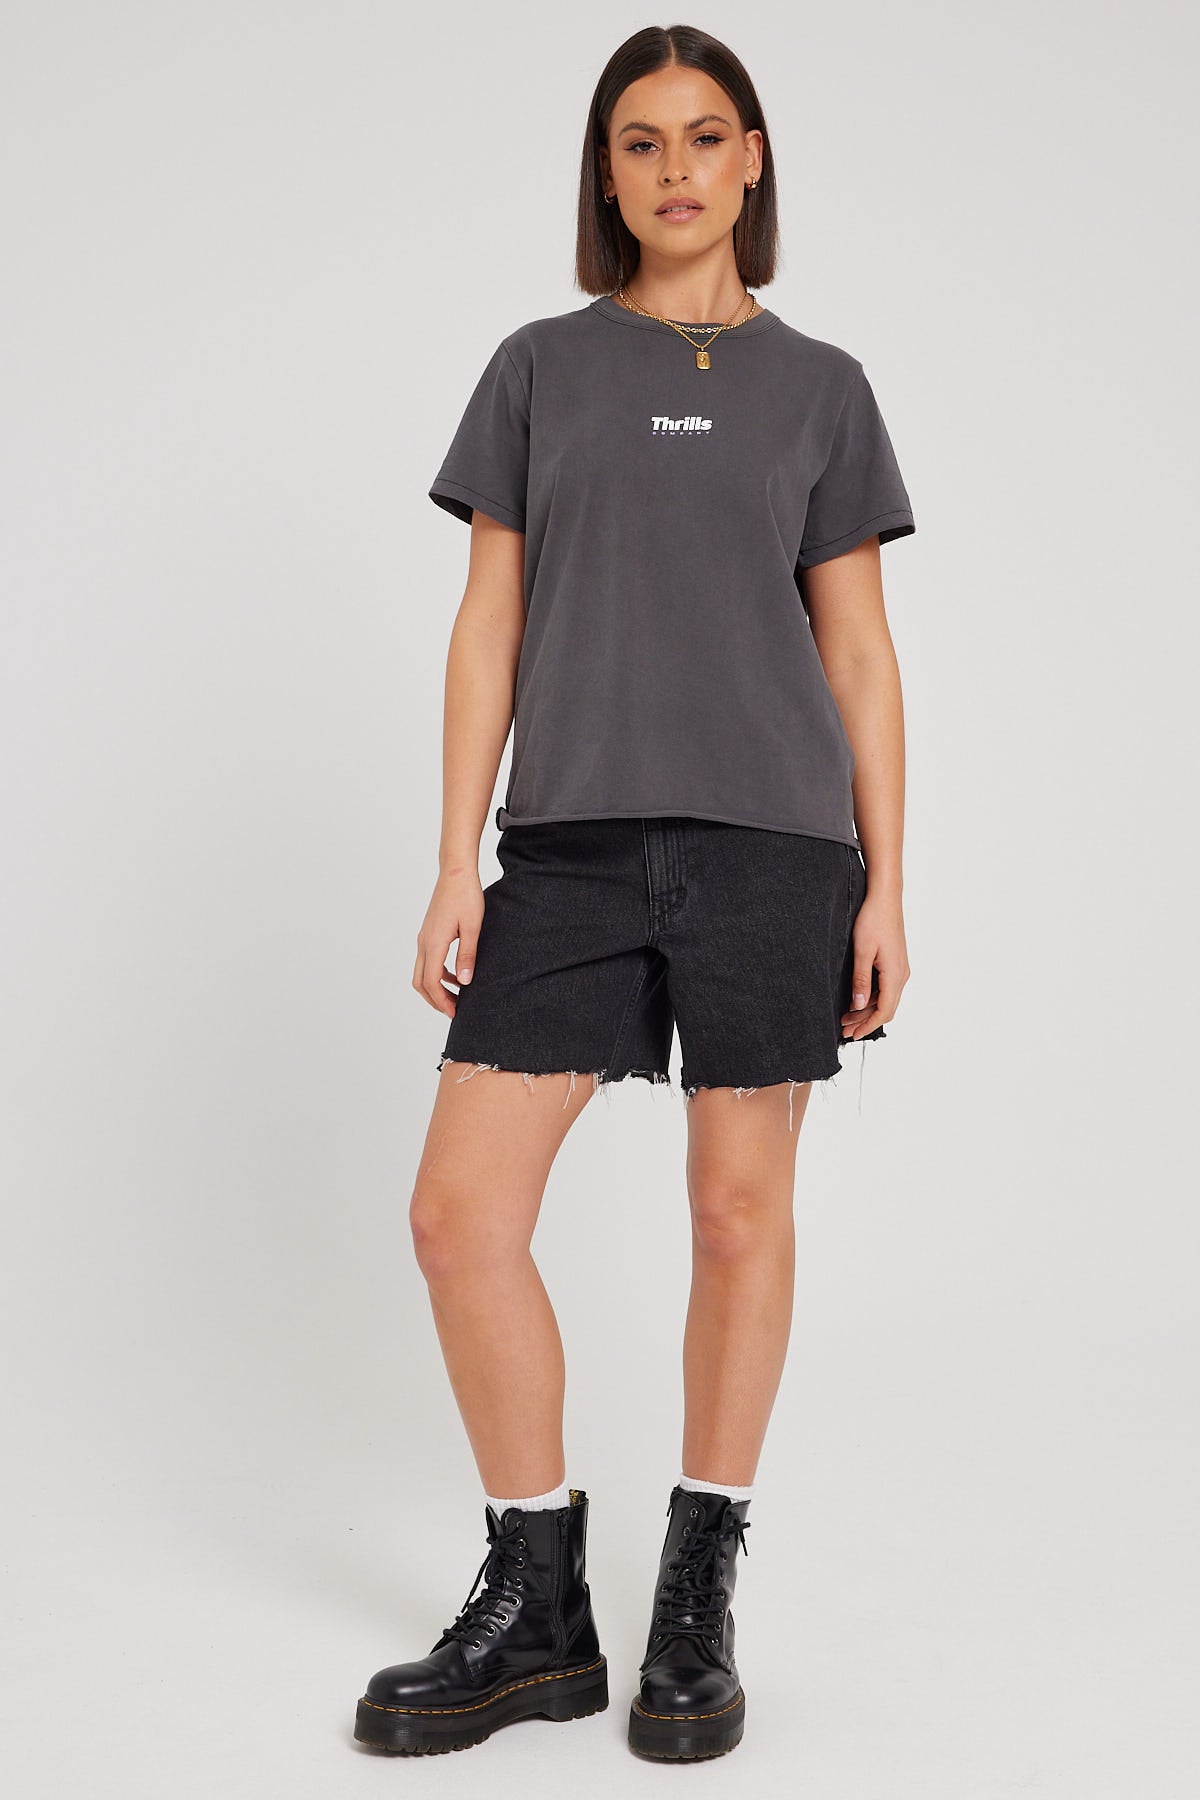 Thrills Paradox Relaxed Fit Tee Merch Black